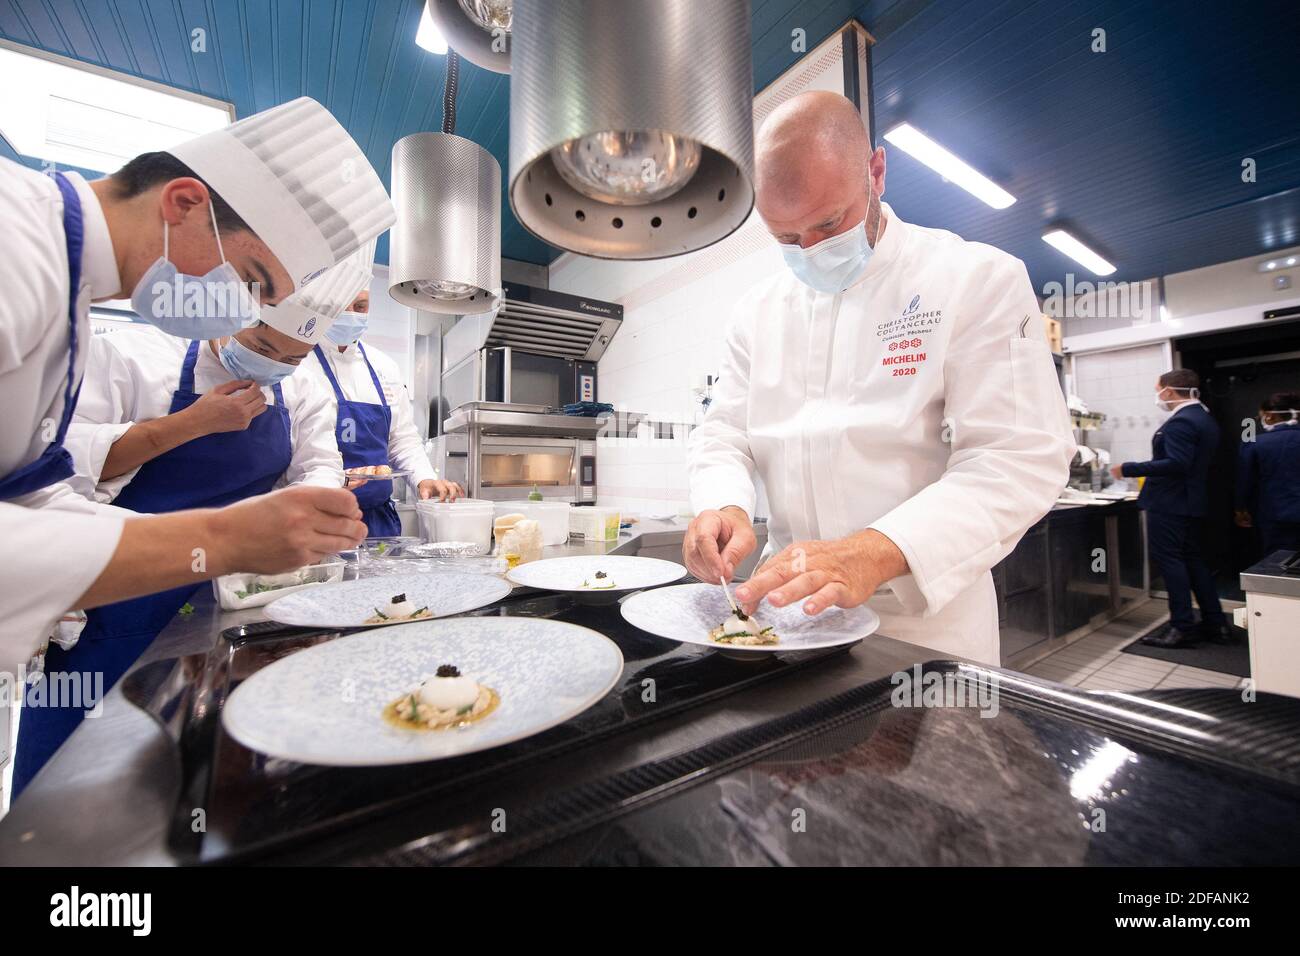 INTERVIEW AVAILABLE ON REQUEST - Exclusive - Reopening of the famous gastronomic restaurant of Christopher Coutanceau, three stars the Michelin guide and member of Relais & Châteaux and Grandes Tables du Monde, on June 5, 2020 in La Rochelle, France. Photo by David Niviere/ABACAPRESS.COM Stock Photo